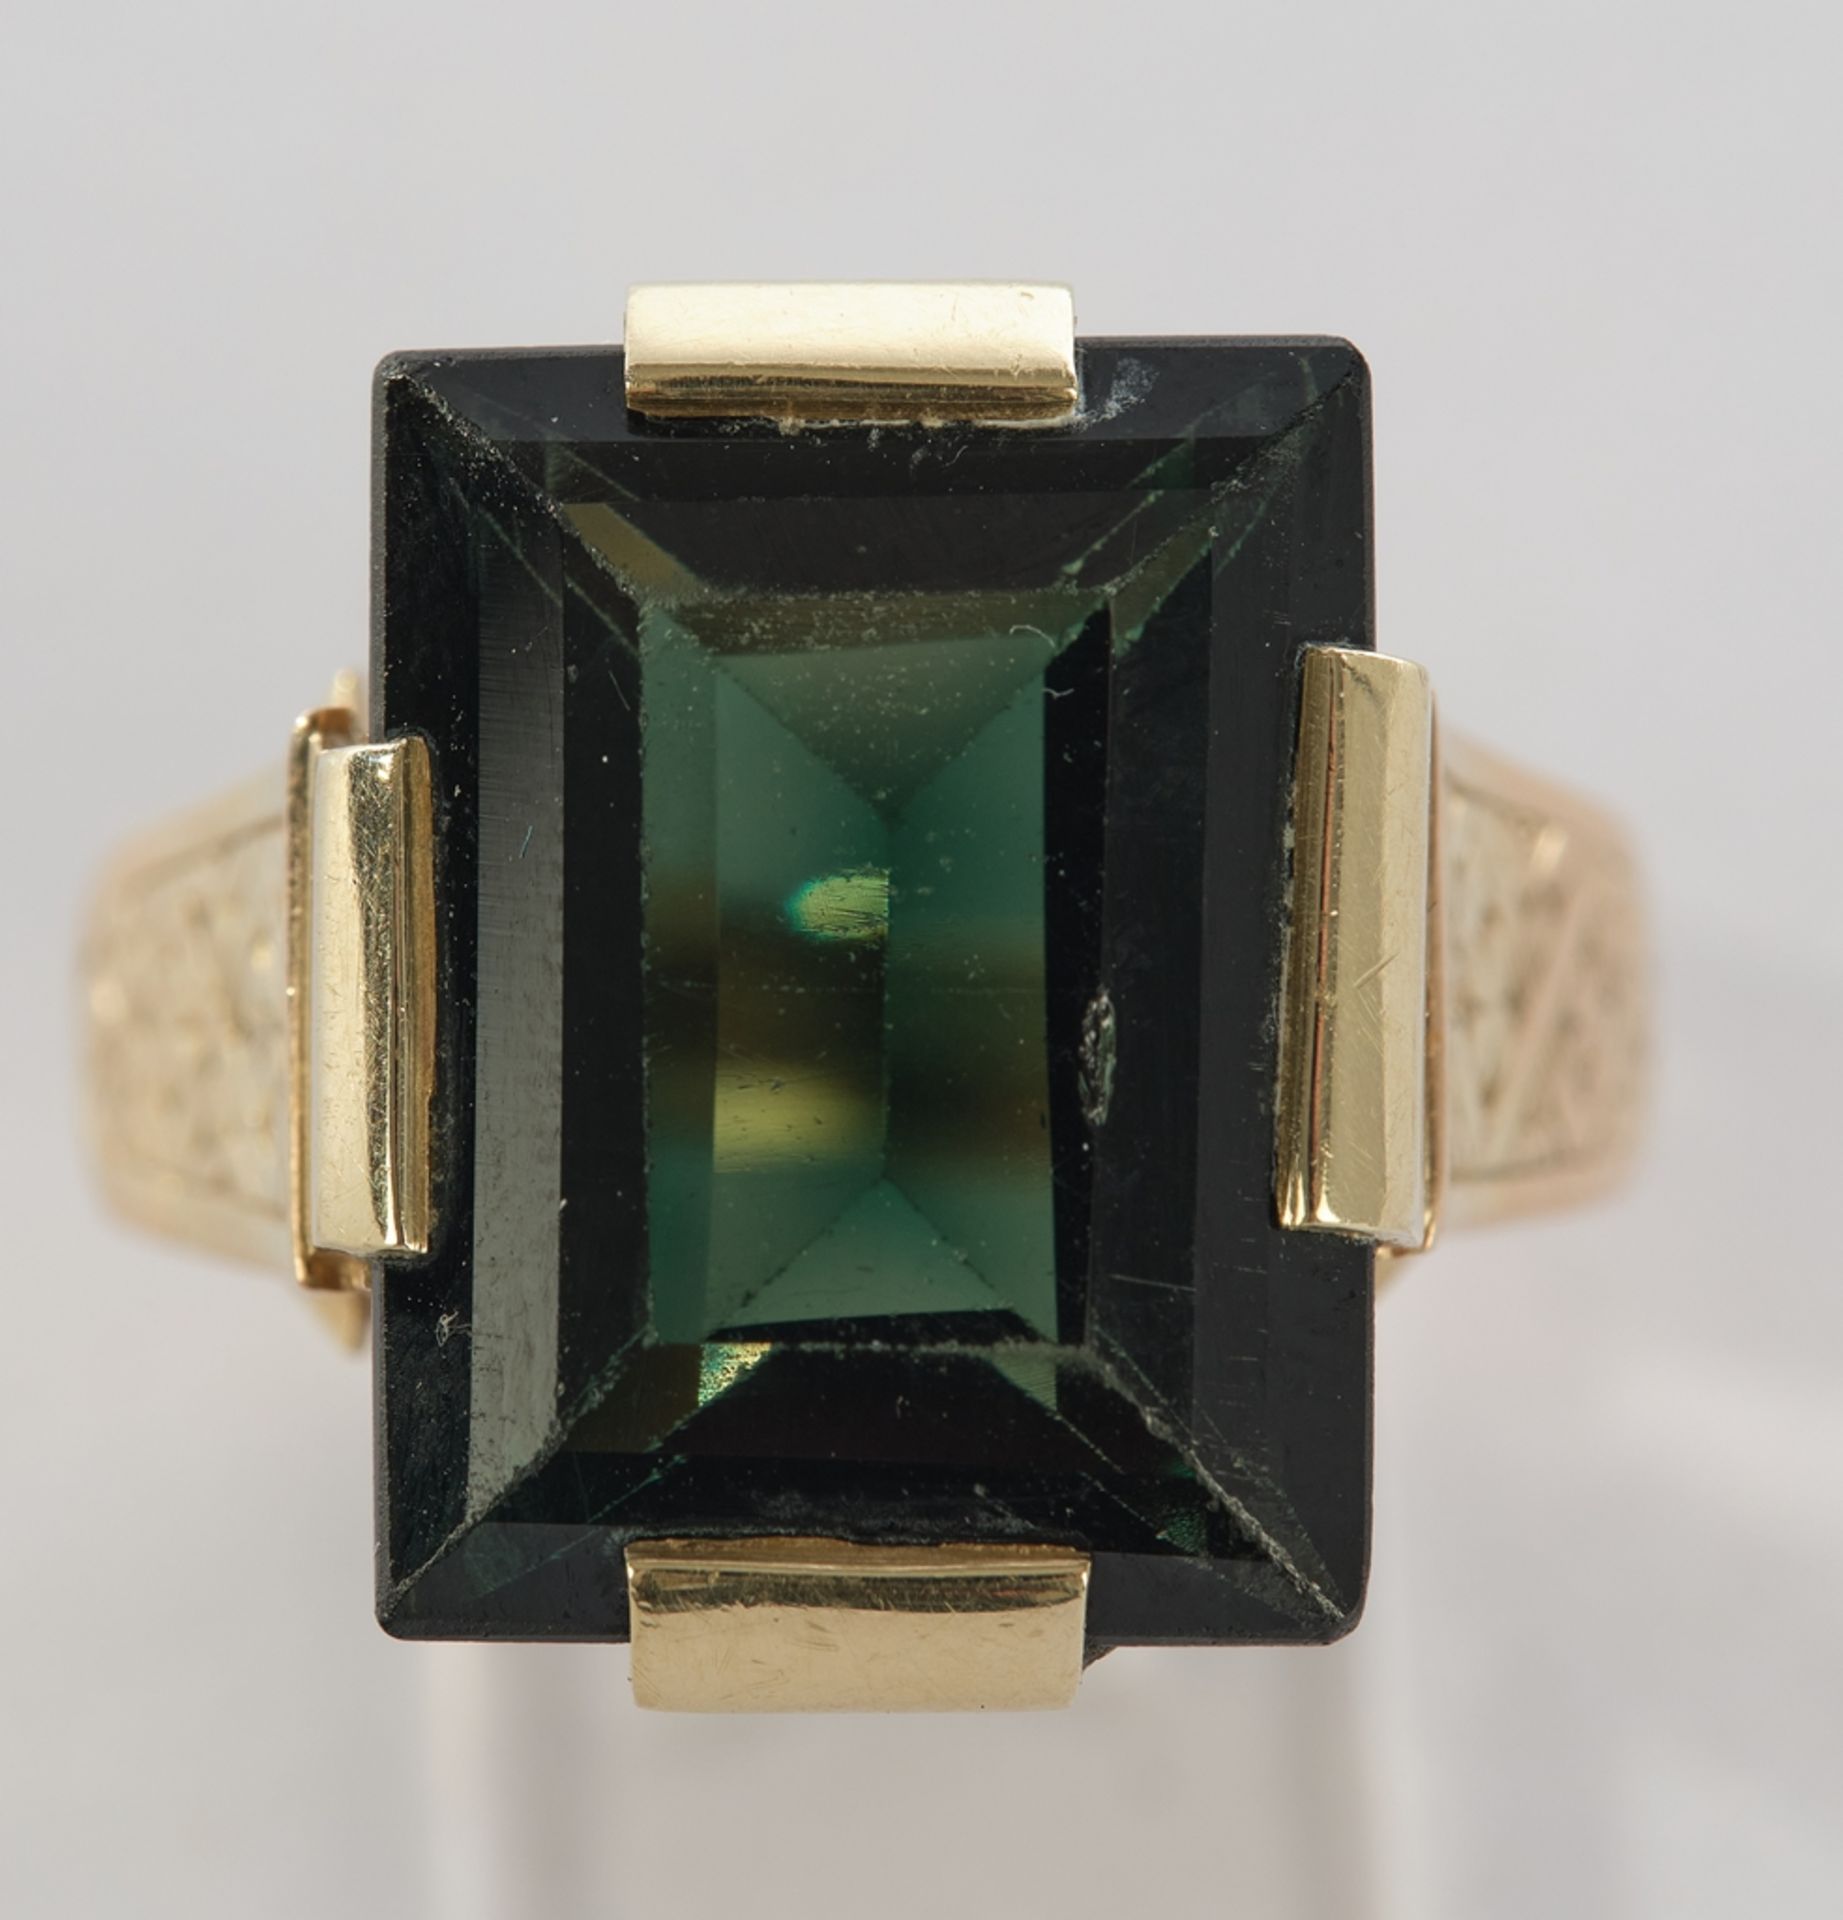 Ring, GG 585, probably tourmaline c. 10.0 ct, 7.85 g, RM 54.5 - Image 2 of 3